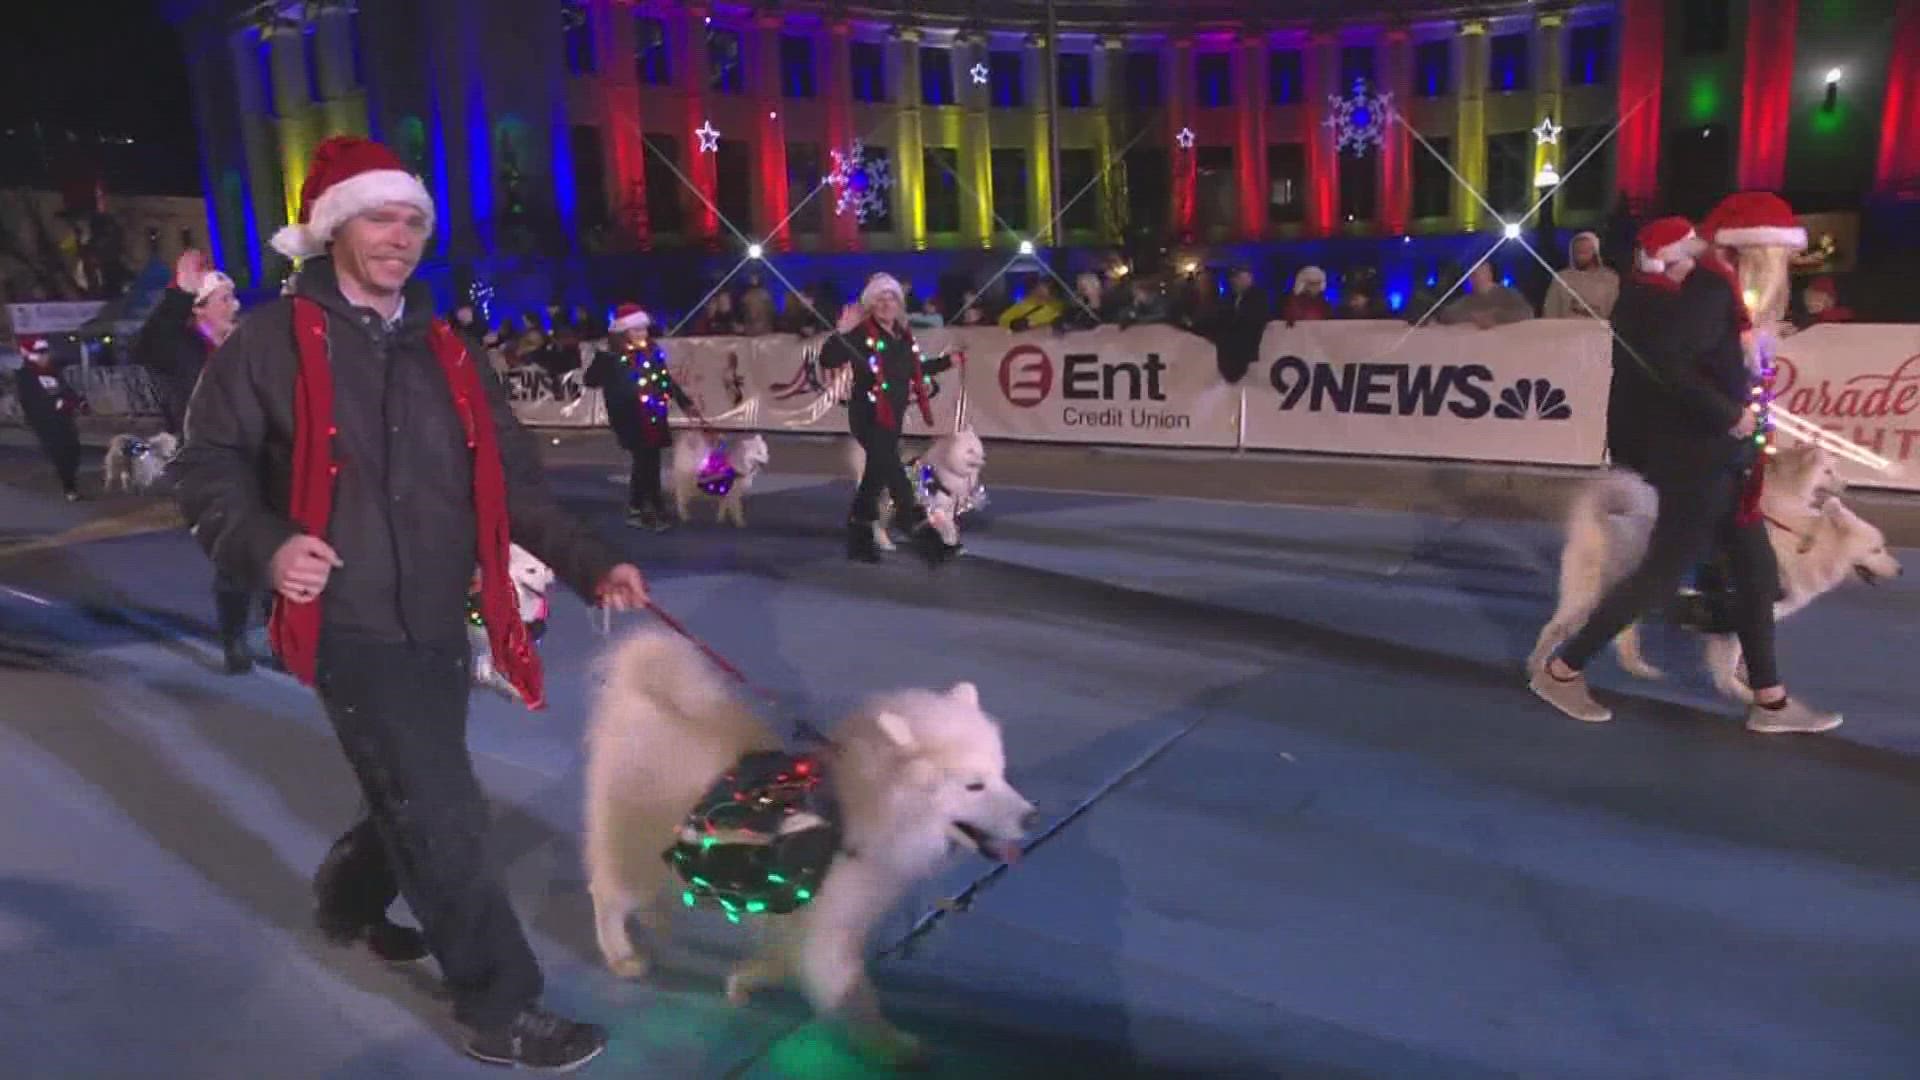 The 48th annual 9NEWS Parade of Lights will bring sparkling lights, marching bands, and colorful floats to the streets of downtown Denver on Saturday, Dec 3.